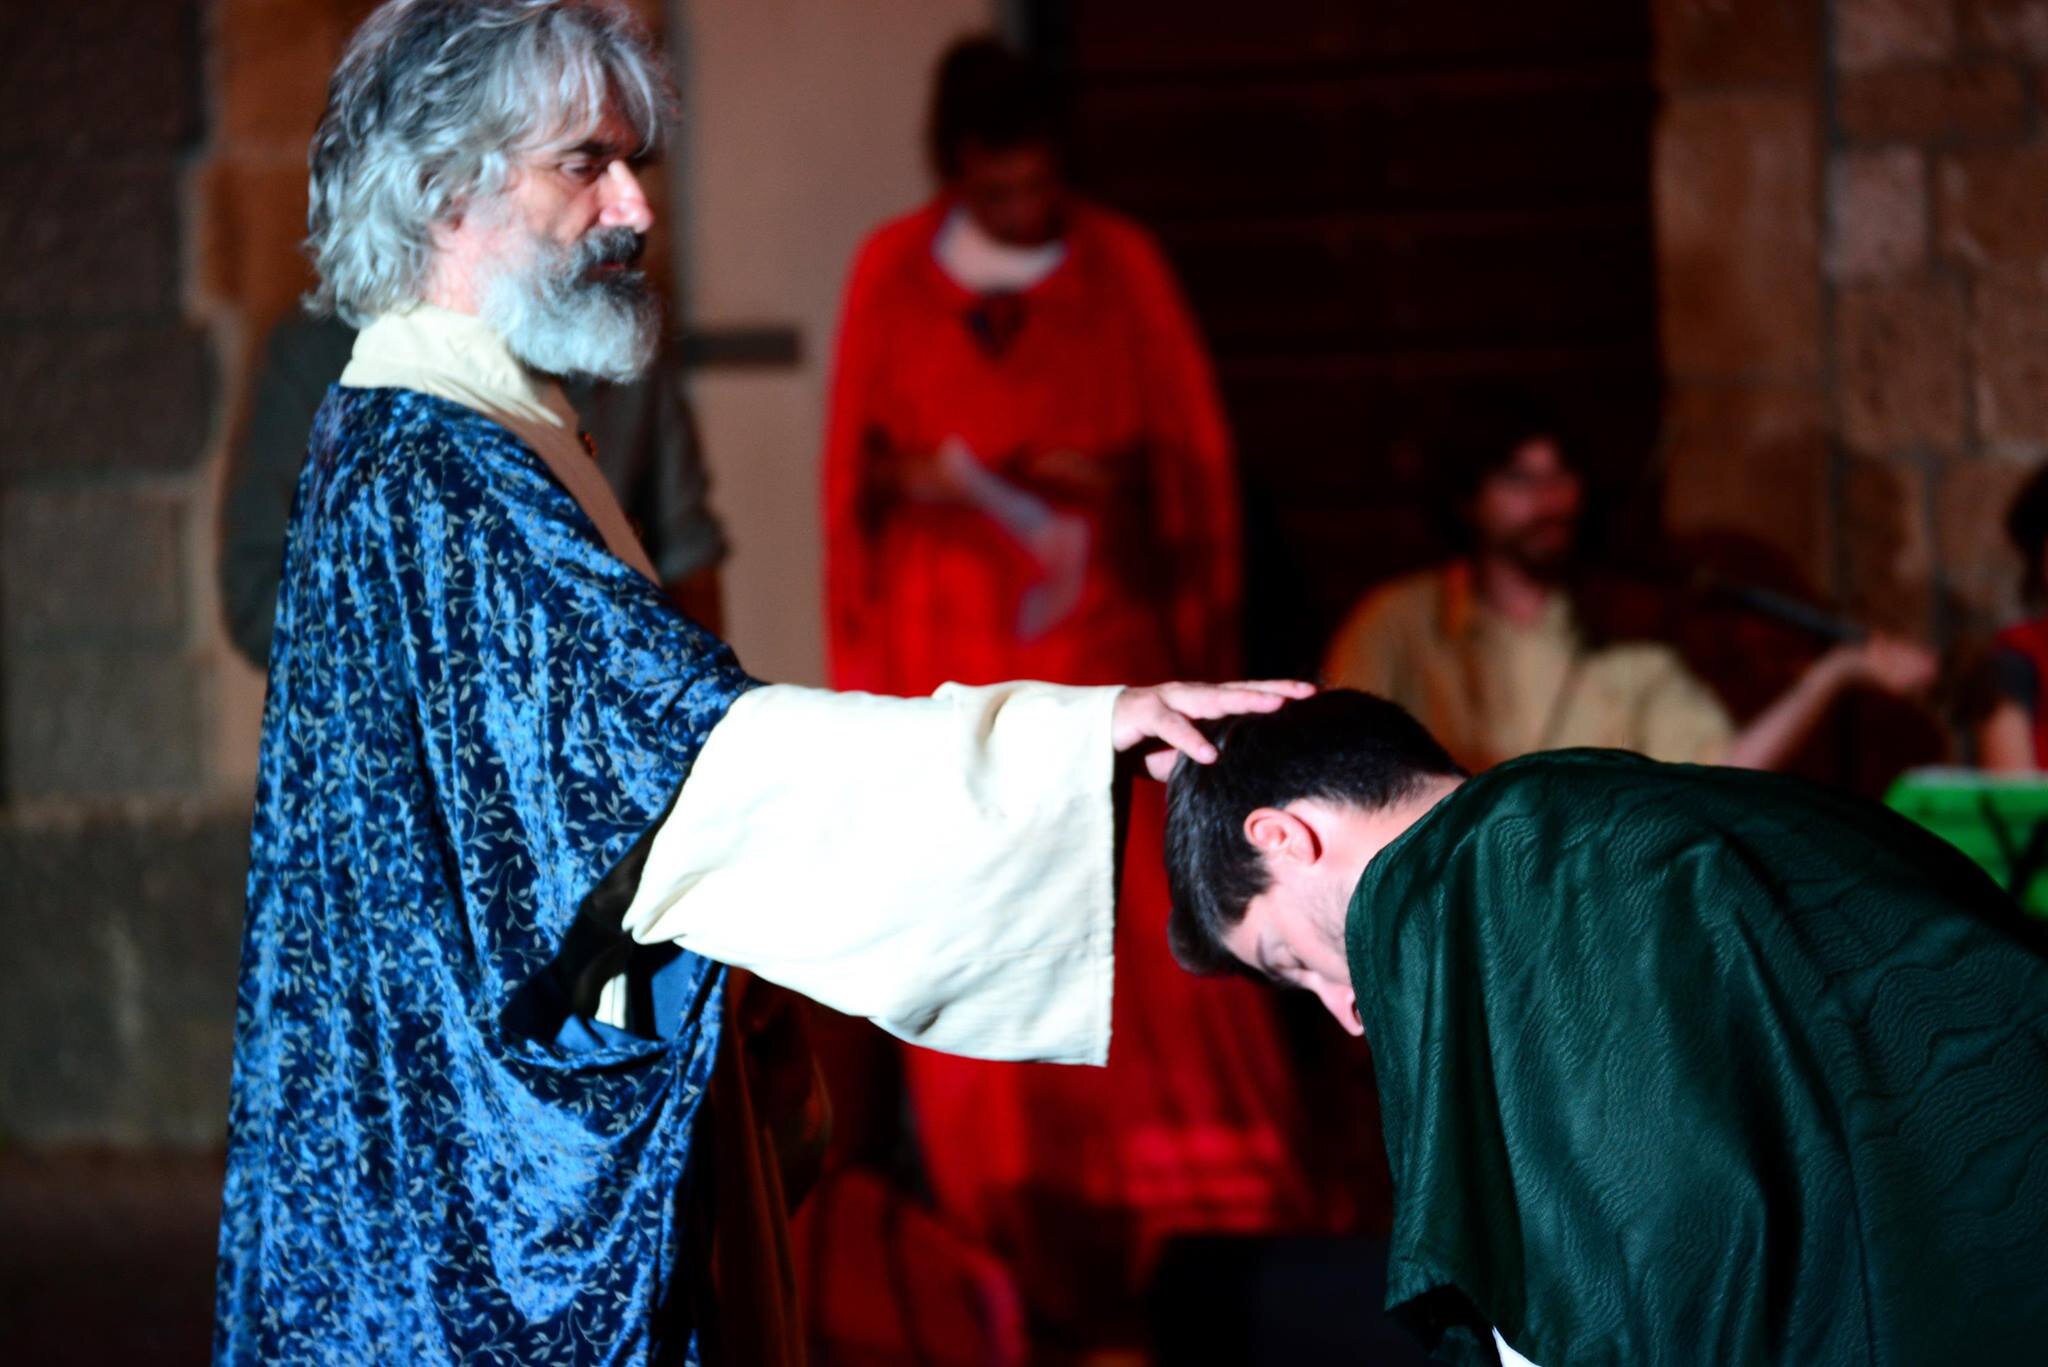  The consecration of Juvenal as priest 